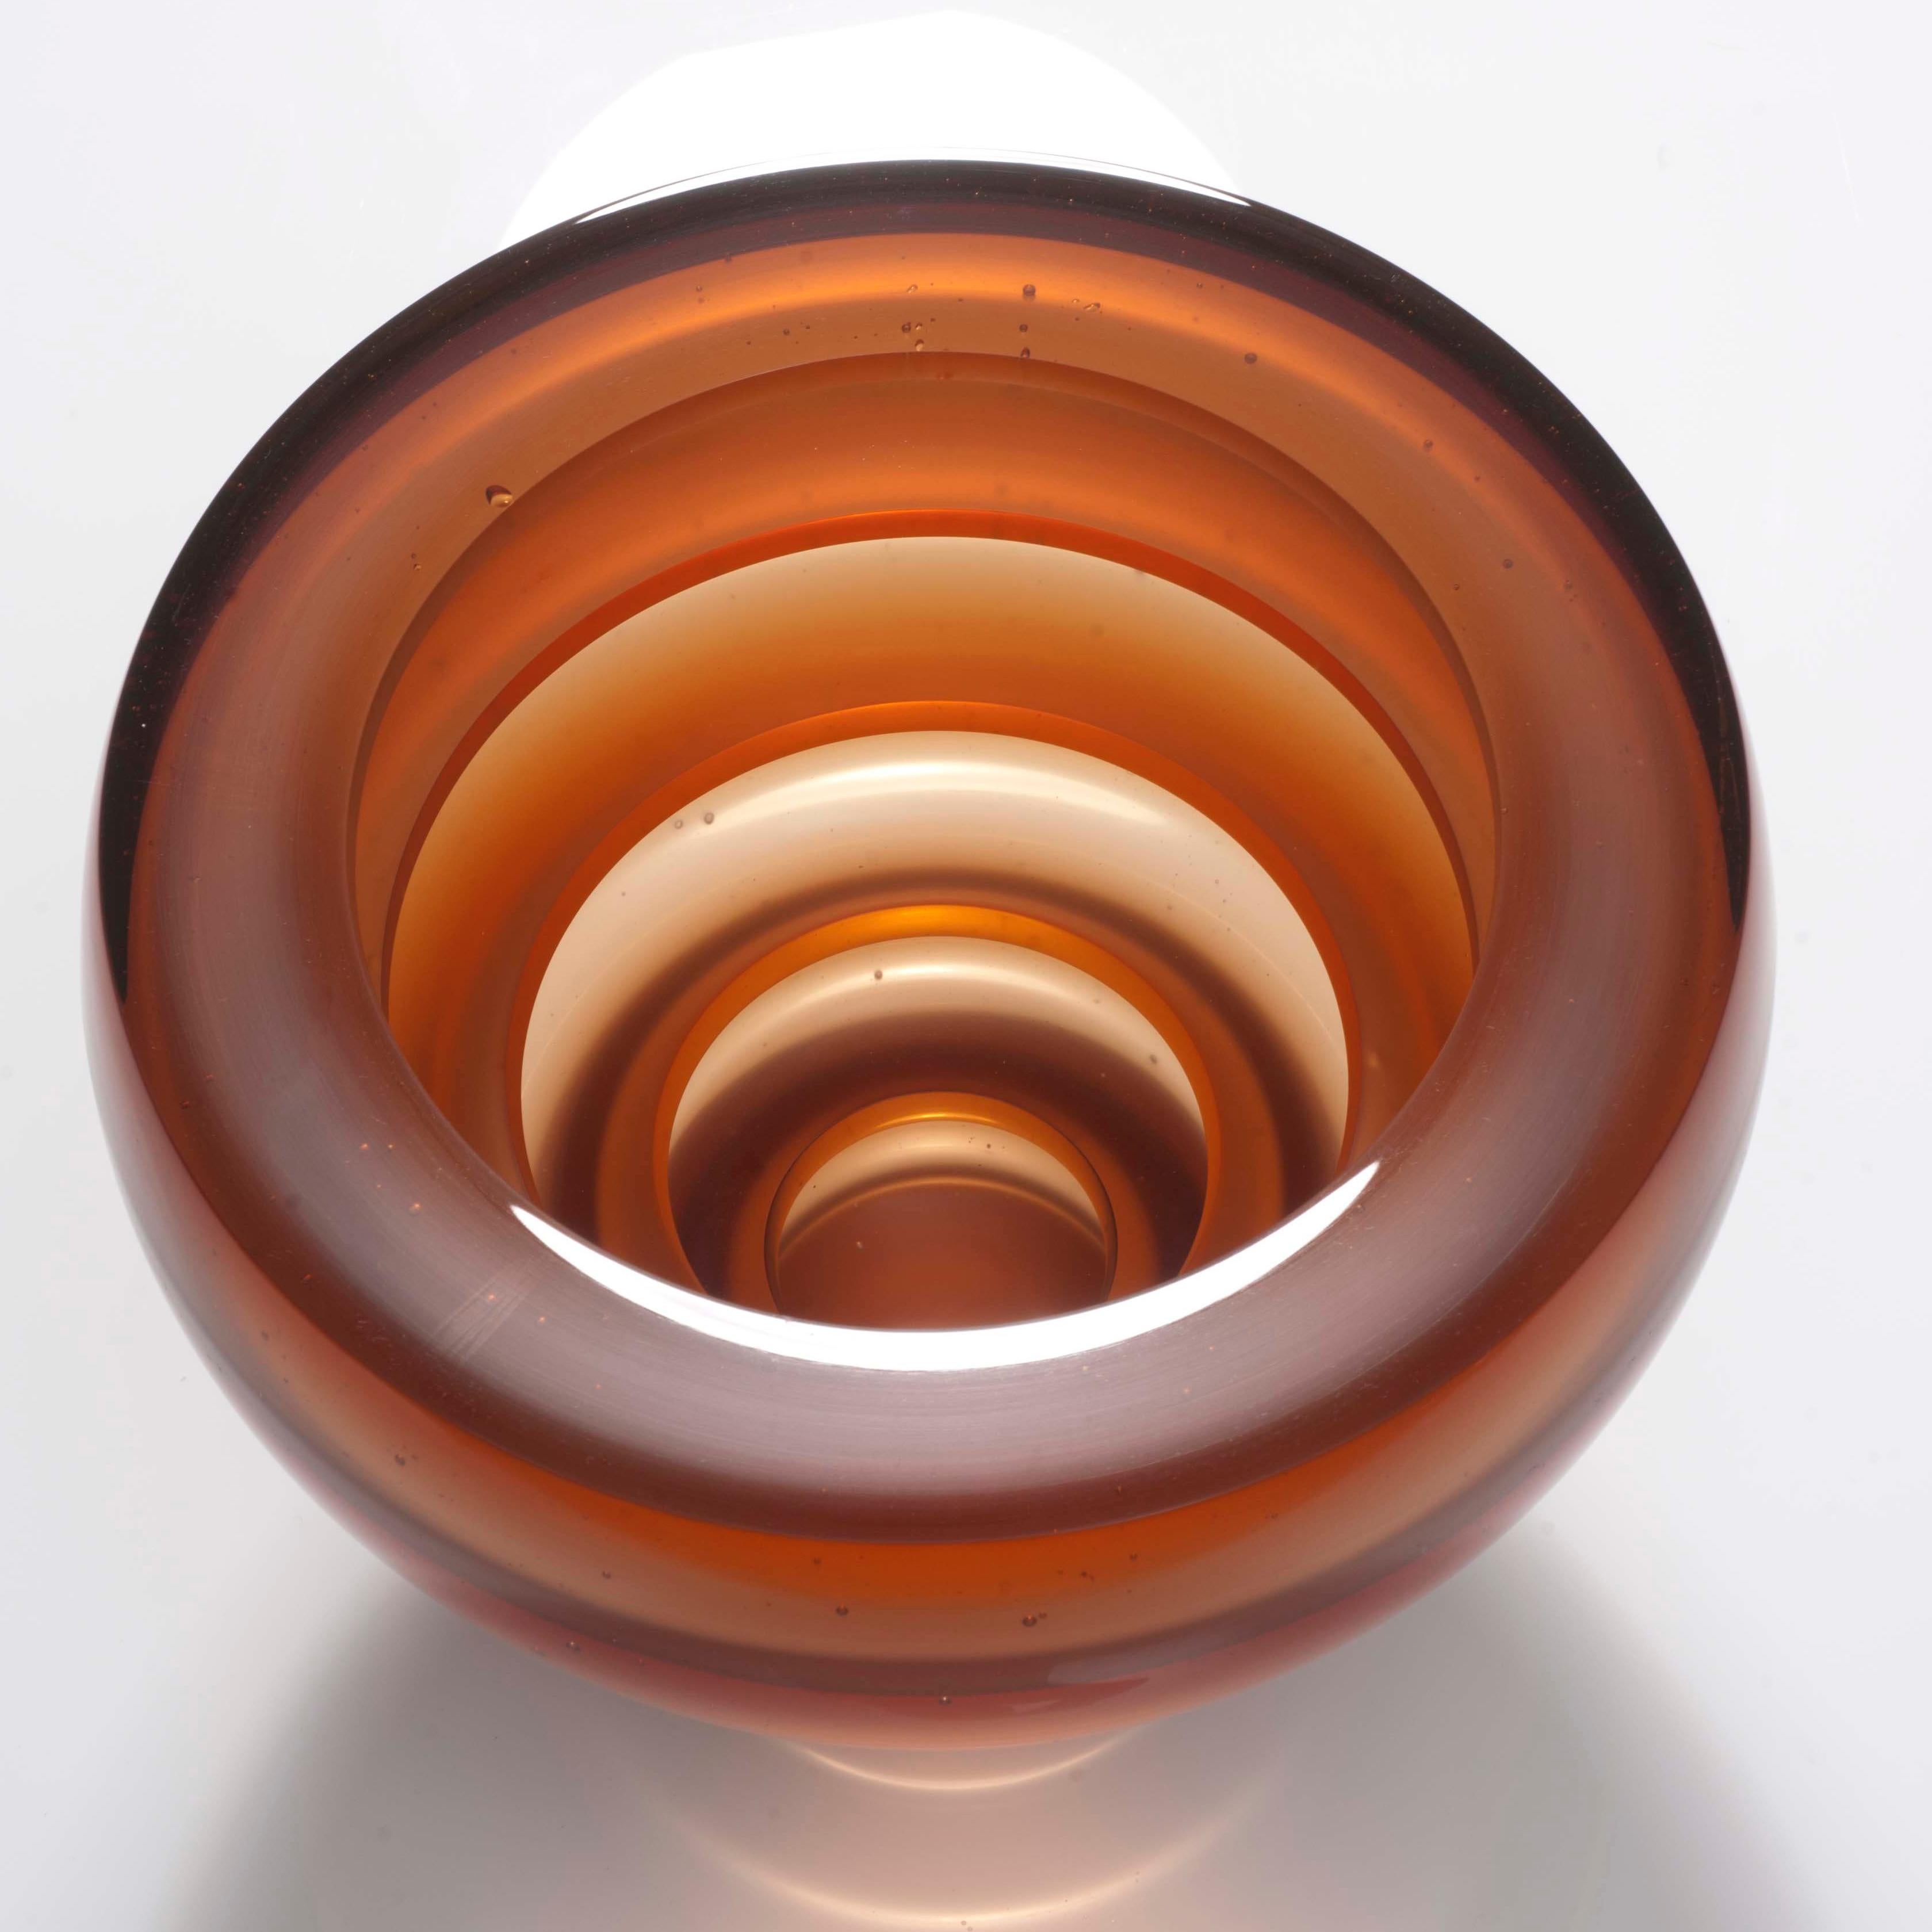 British Luka, a unique amber / orange glass art work and centrepiece by Paul Stopler